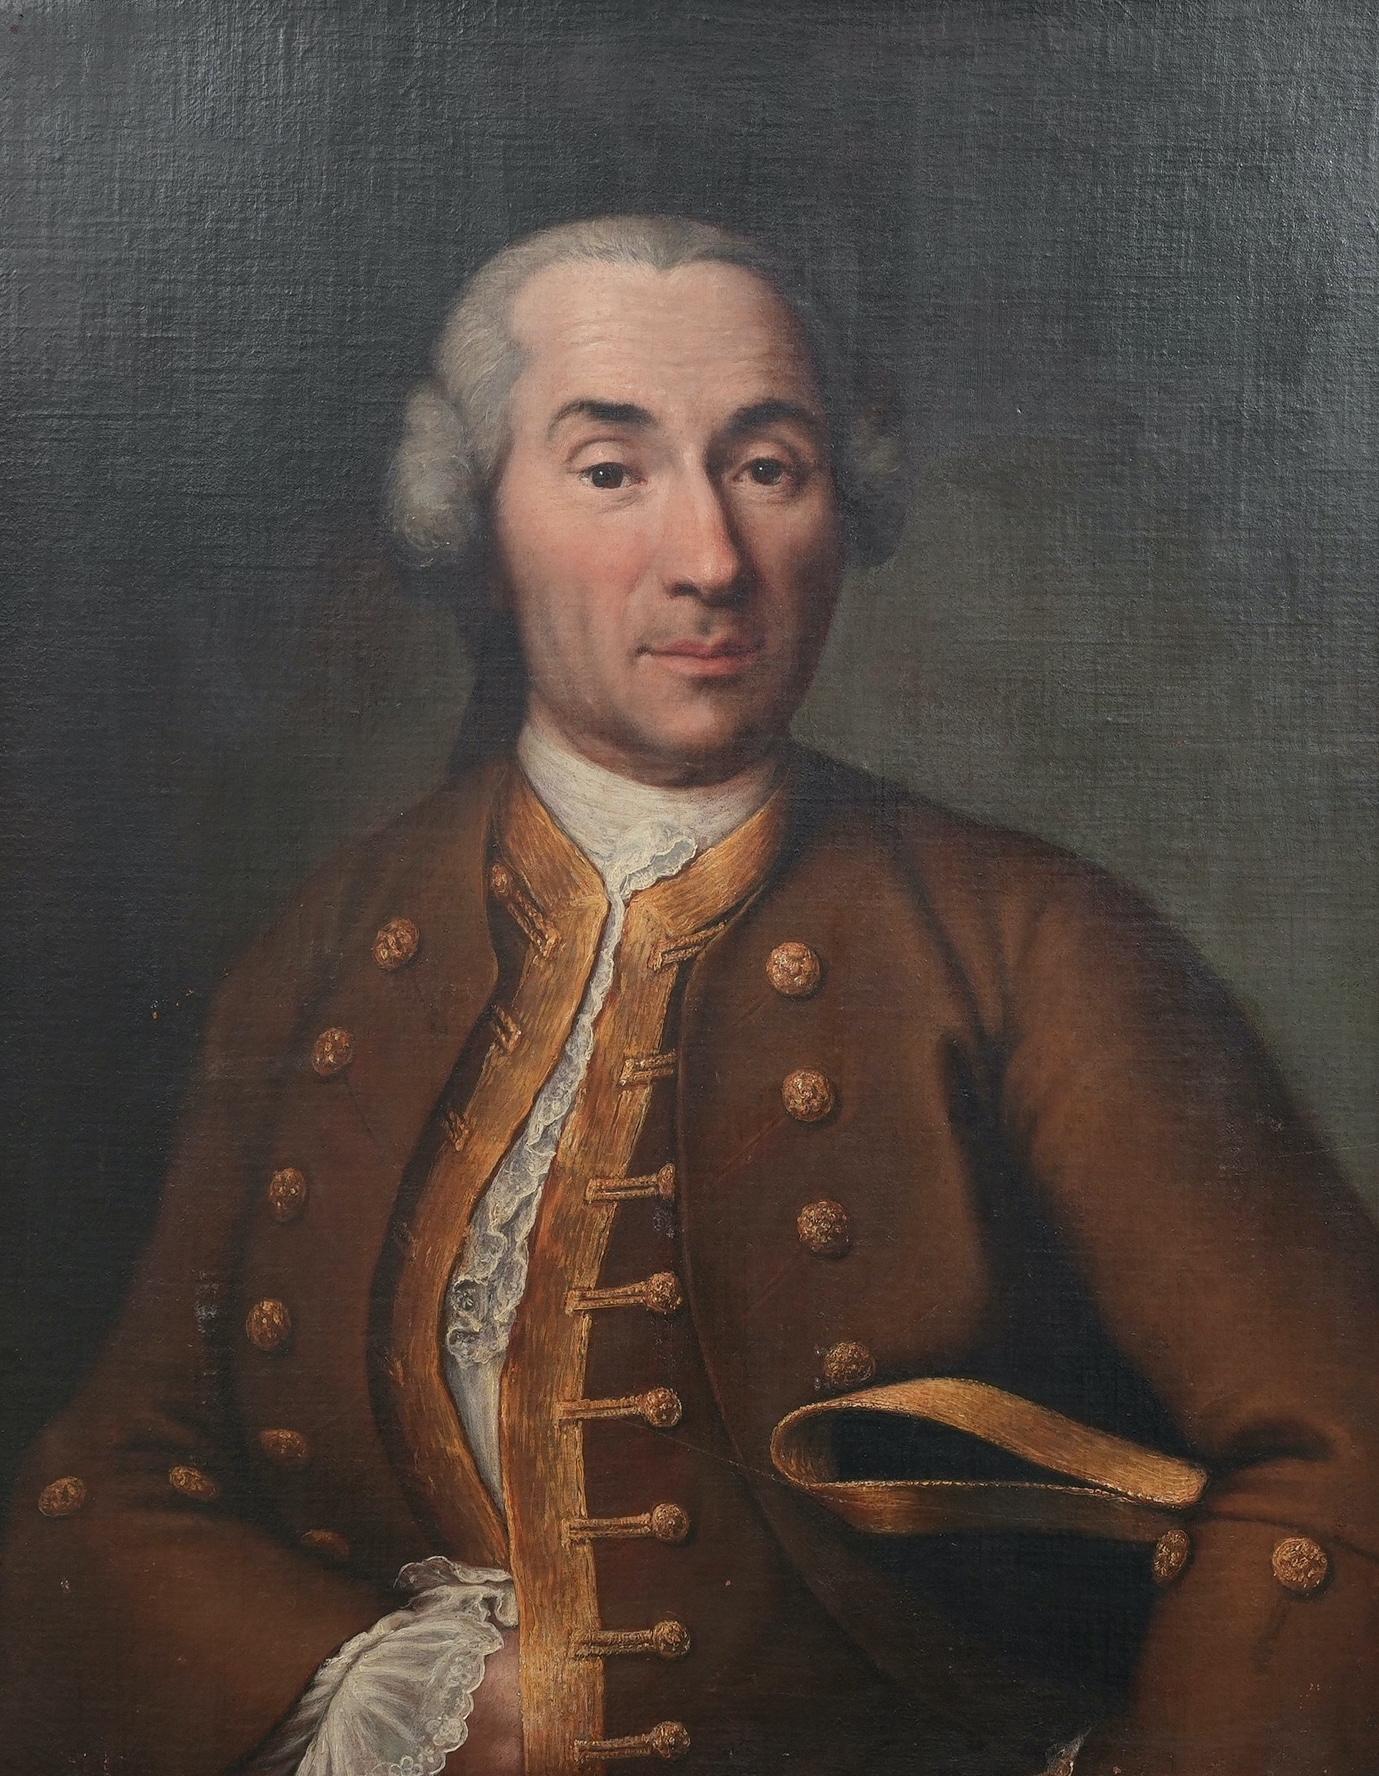 A handsome oil on canvas of an Italian nobleman c 1770. His droll expression is complemented by his galant powdered wig and three-cornered hat tucked under his left shoulder. The frame is possibly contemporaneous with the painting, and in any case